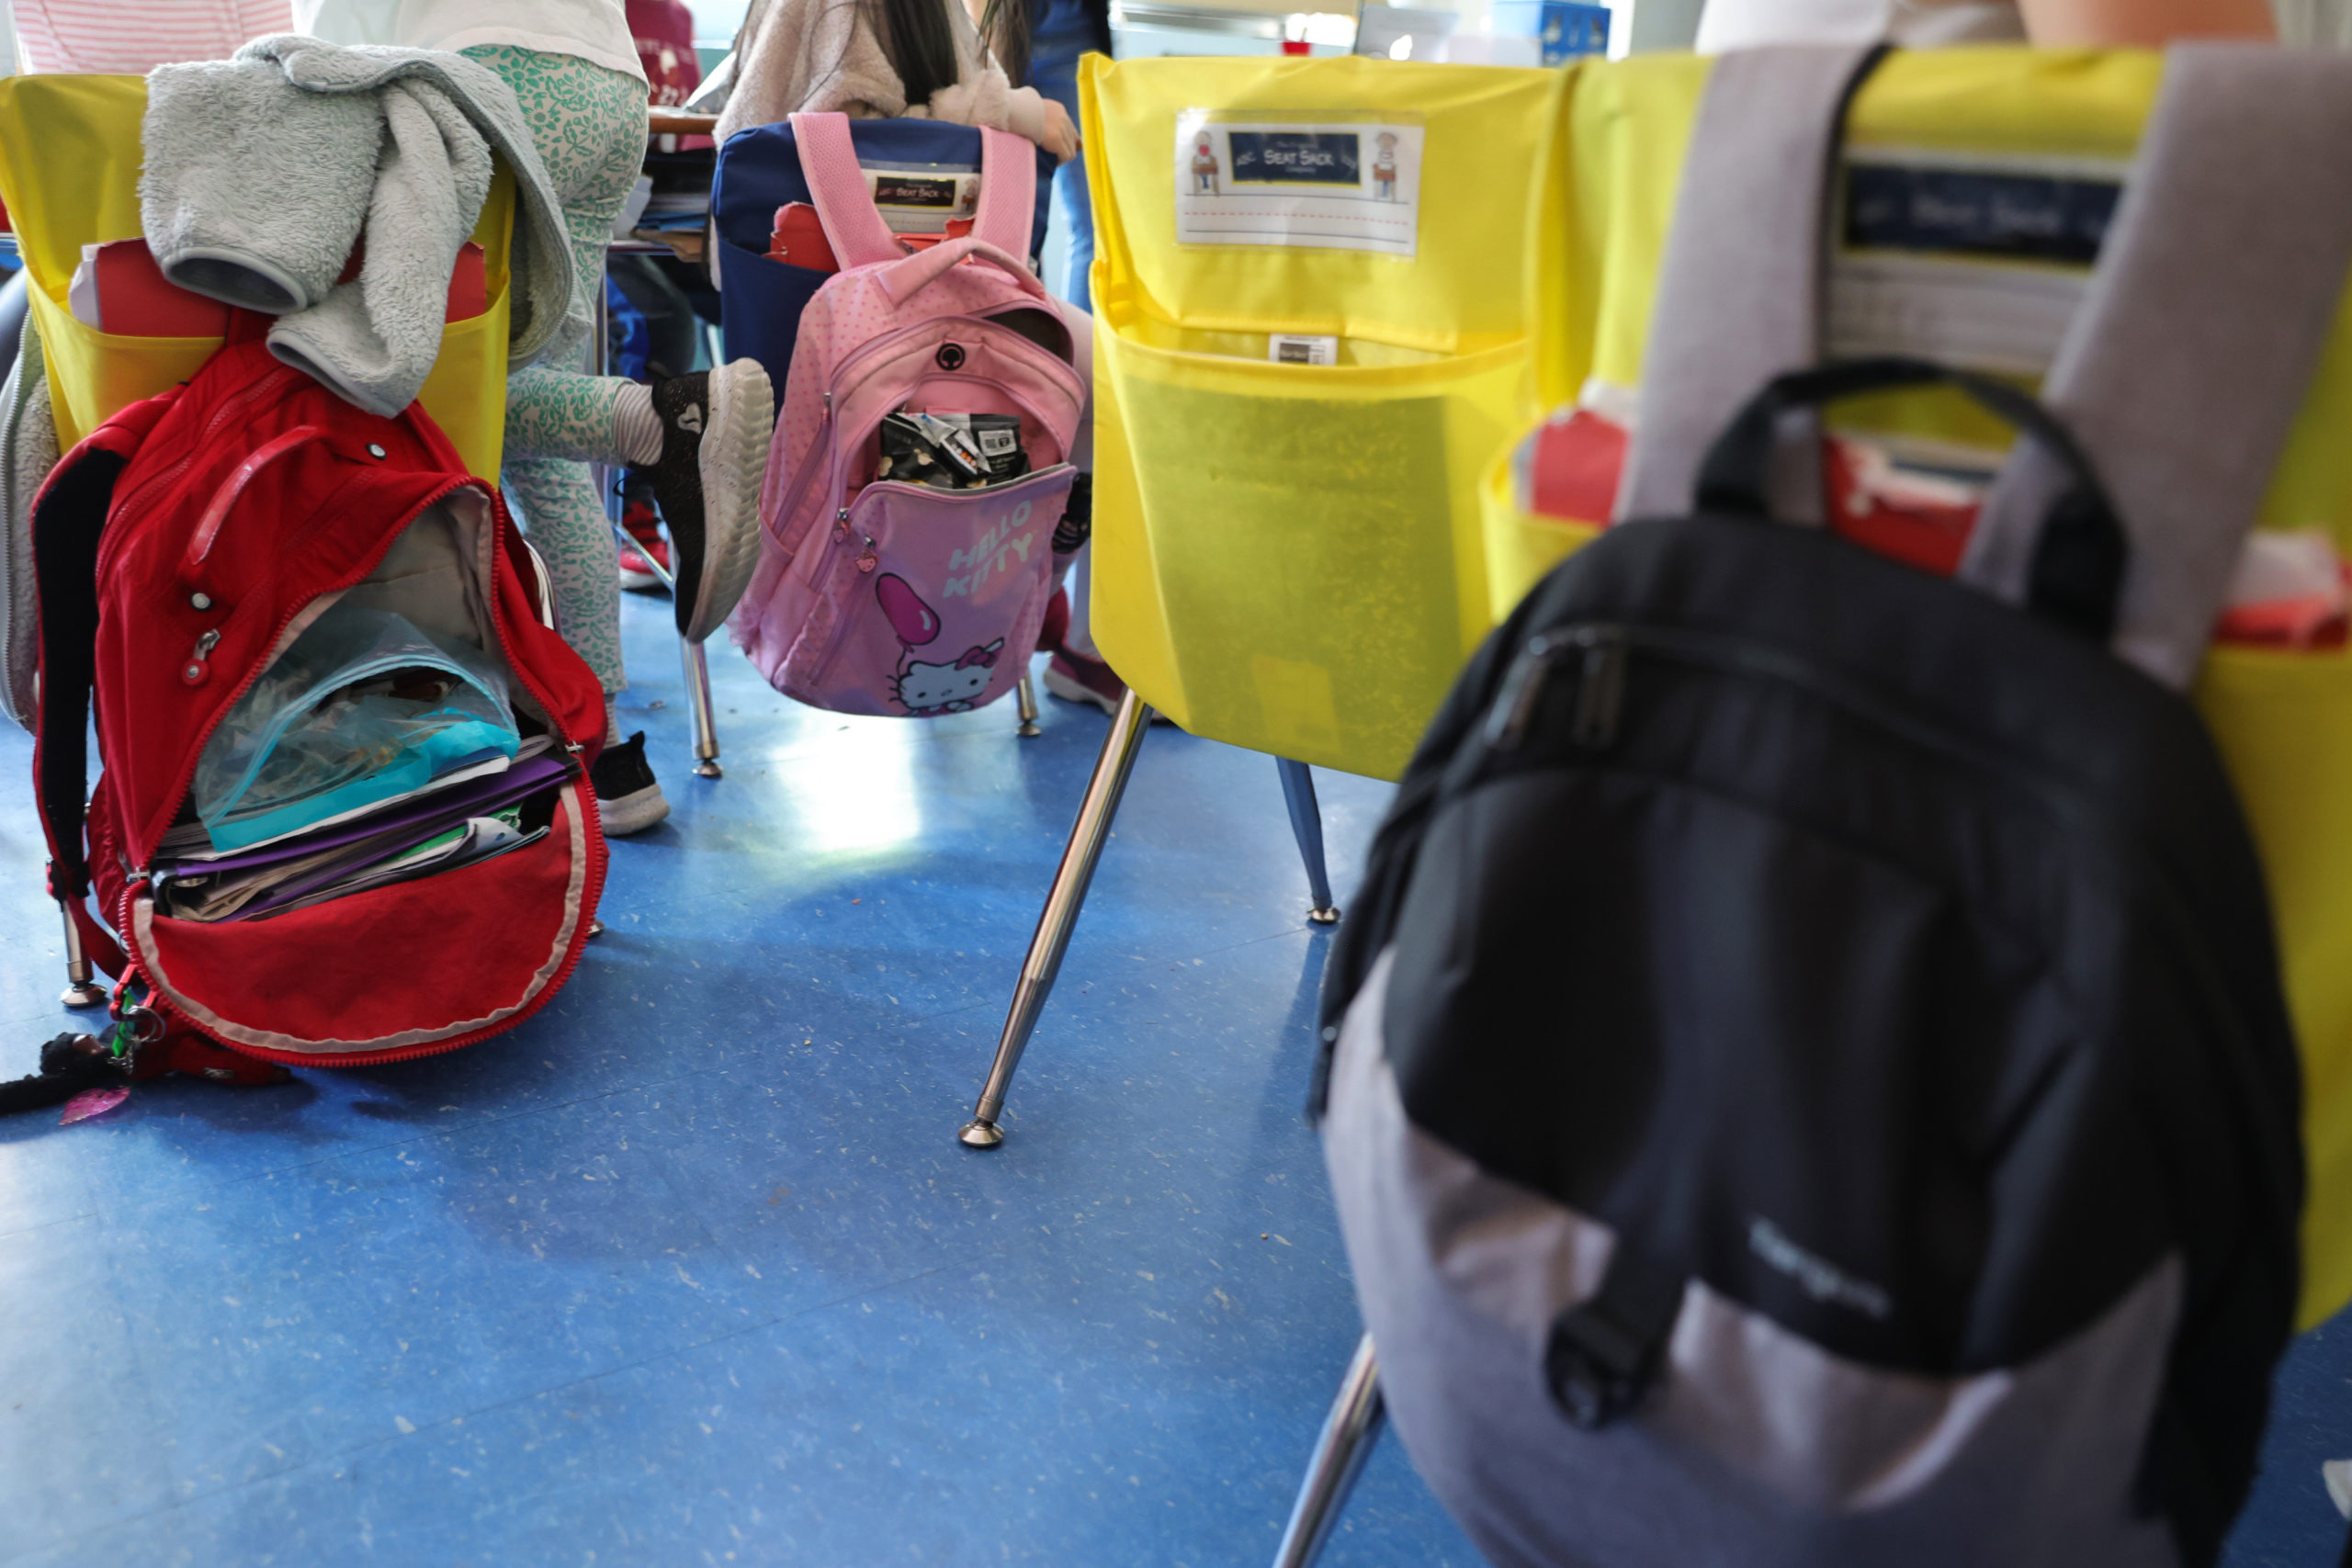 Student backpacks hang on the backs of classroom chairs on the second to last day of school as New York City public schools prepare to wrap up the year at Yung Wing School P.S. 124 on June 24, 2022 in New York City. Approximately 75% of NYC public schools enrolled fewer students for the 2021/2022 school year due to the pandemic. (Photo by Michael Loccisano/Getty Images)